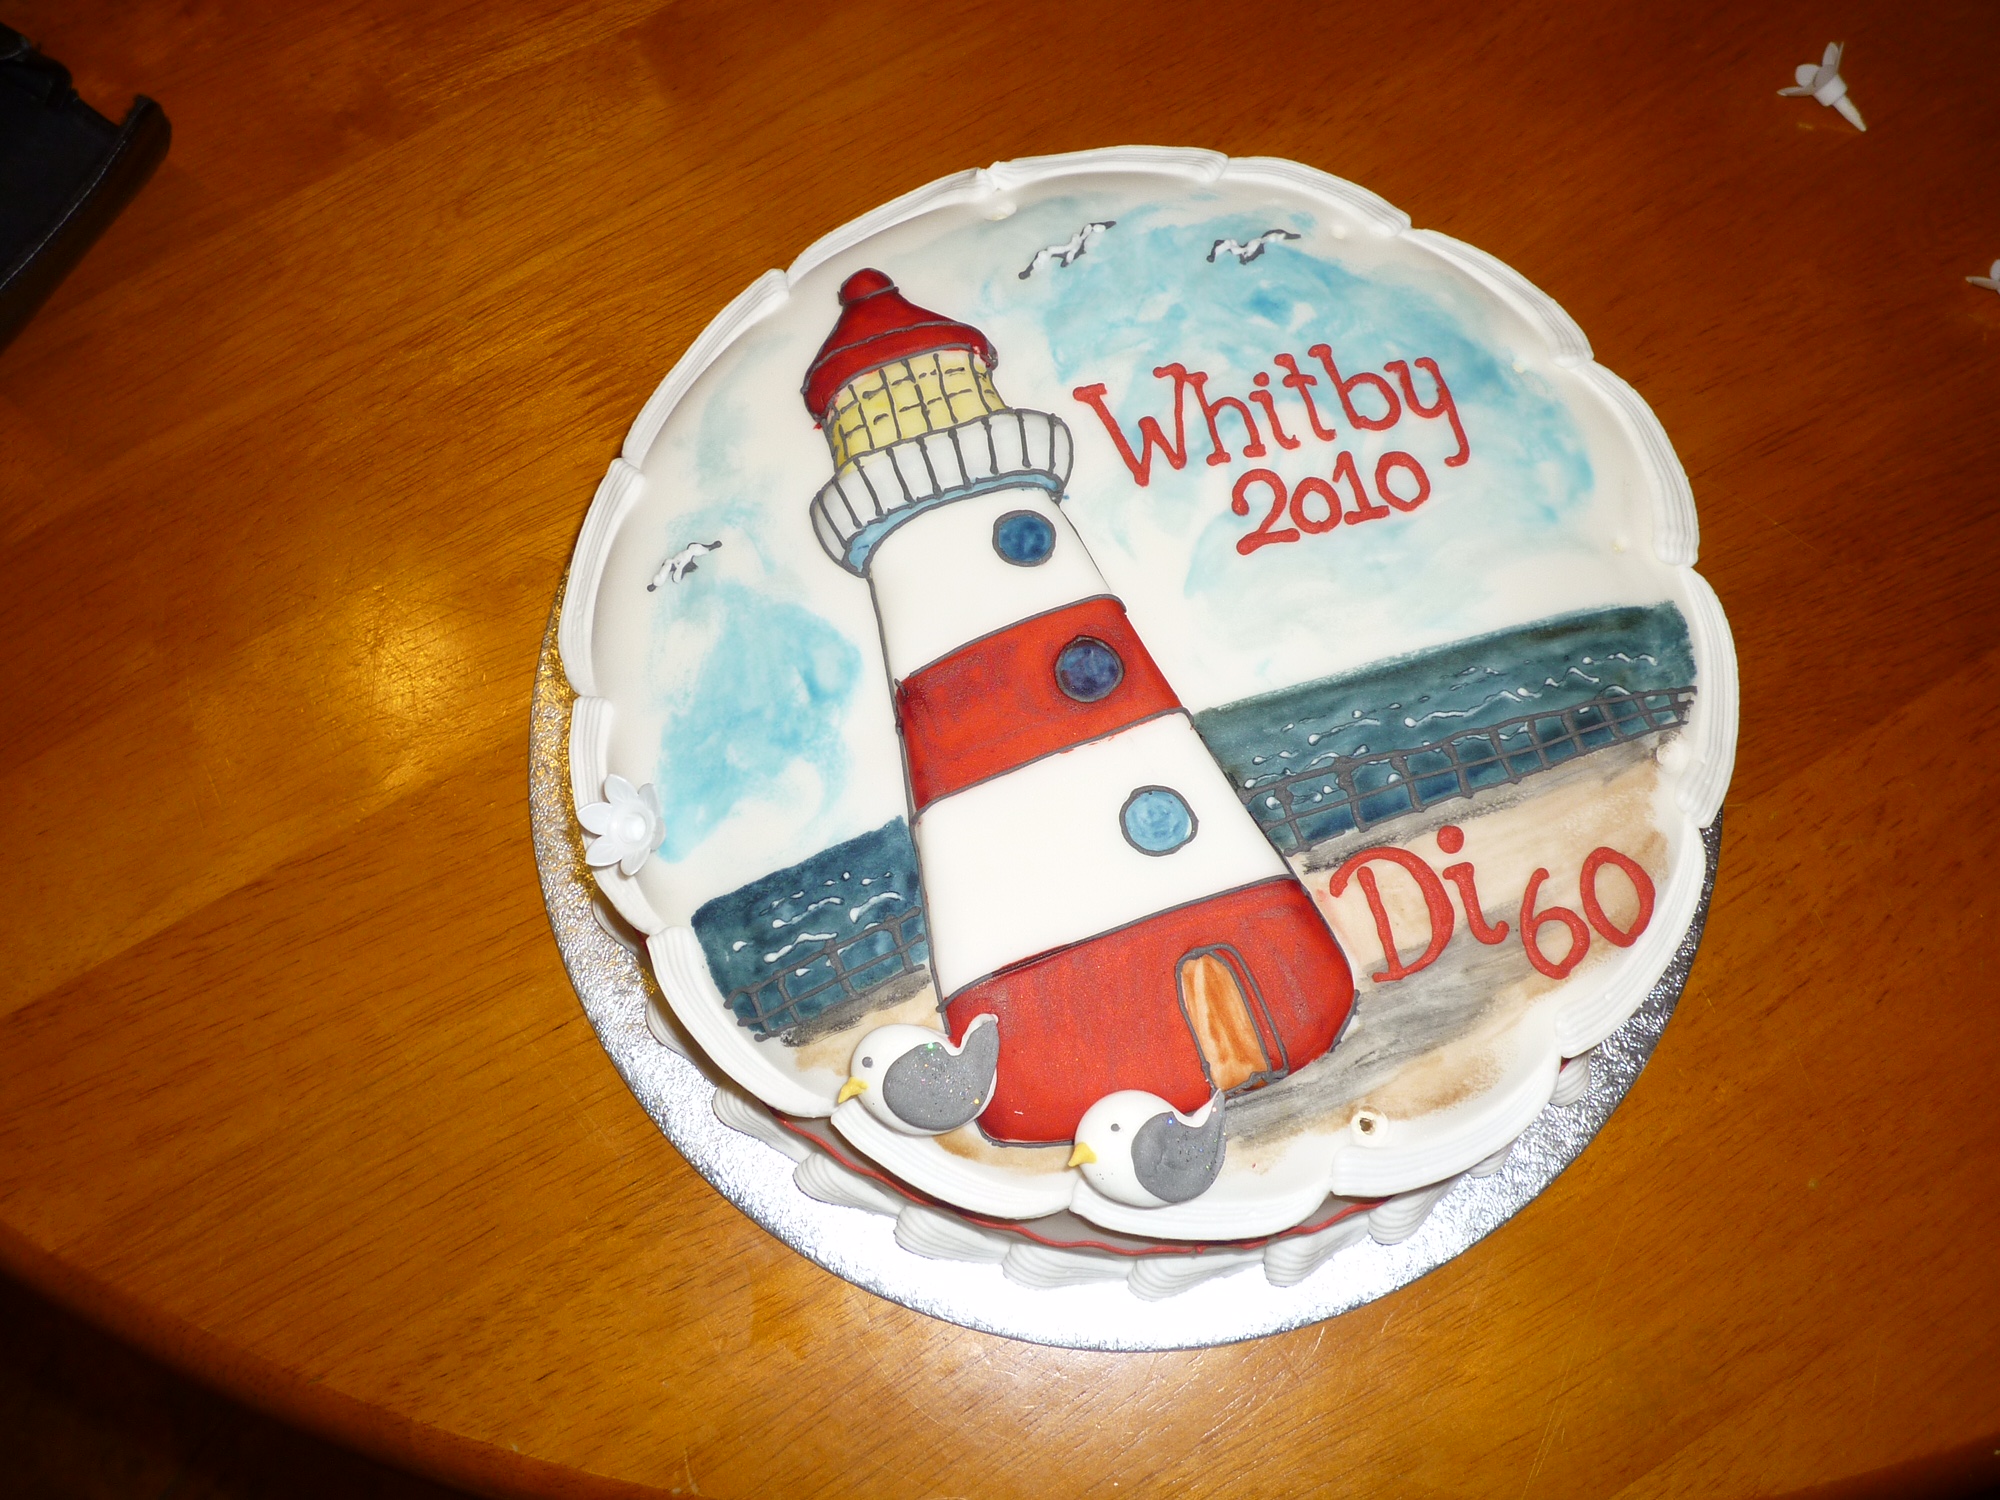 Seaside Holiday: Here is the cake again.